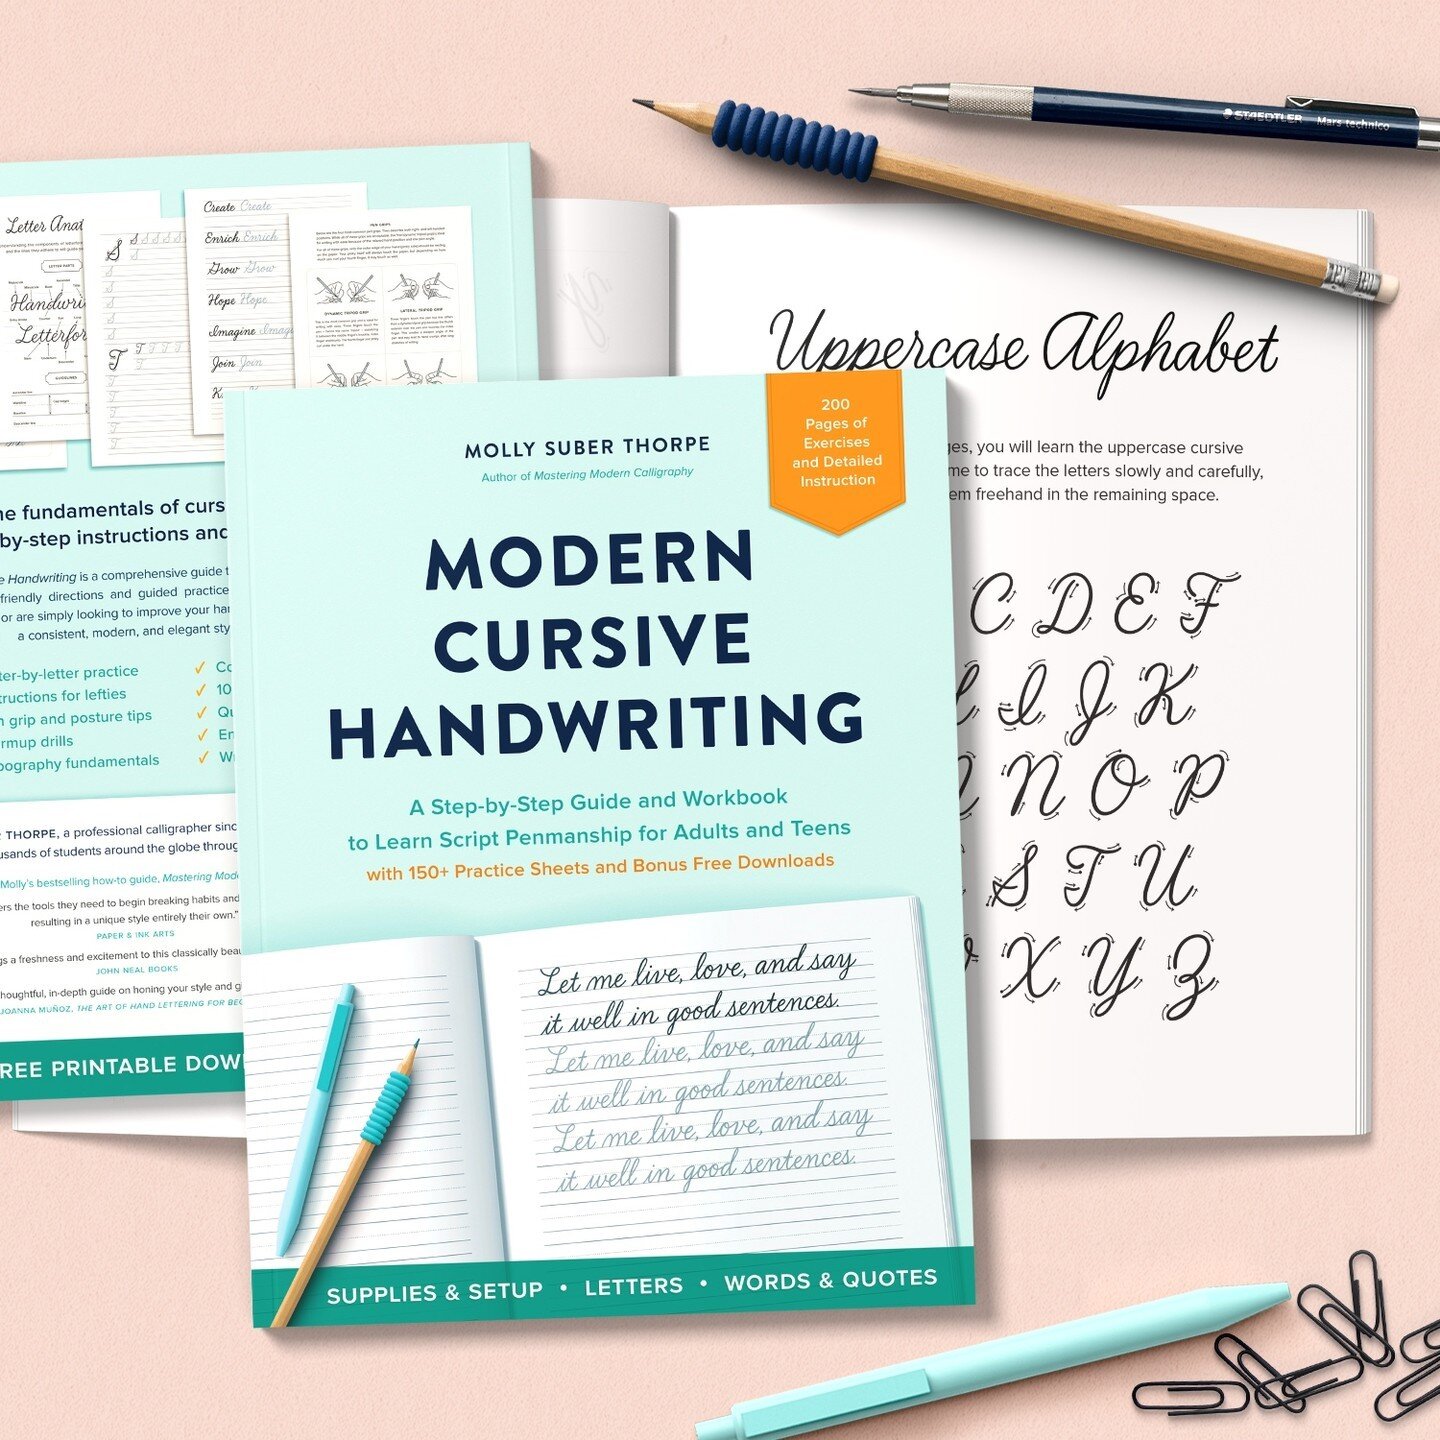 ✨ ɴ ᴇ ᴡ  ʙ ᴏ ᴏ ᴋ ✨ ⁠⁠
⁠⁠
I&rsquo;m so excited to announce the release of Modern Cursive Handwriting: A Step-by-Step Guide and Workbook to Learn Script Penmanship for Adults and Teens⁠.⁠
⁠⁠
Part instructional guide and part workbook, Modern Cursive Ha